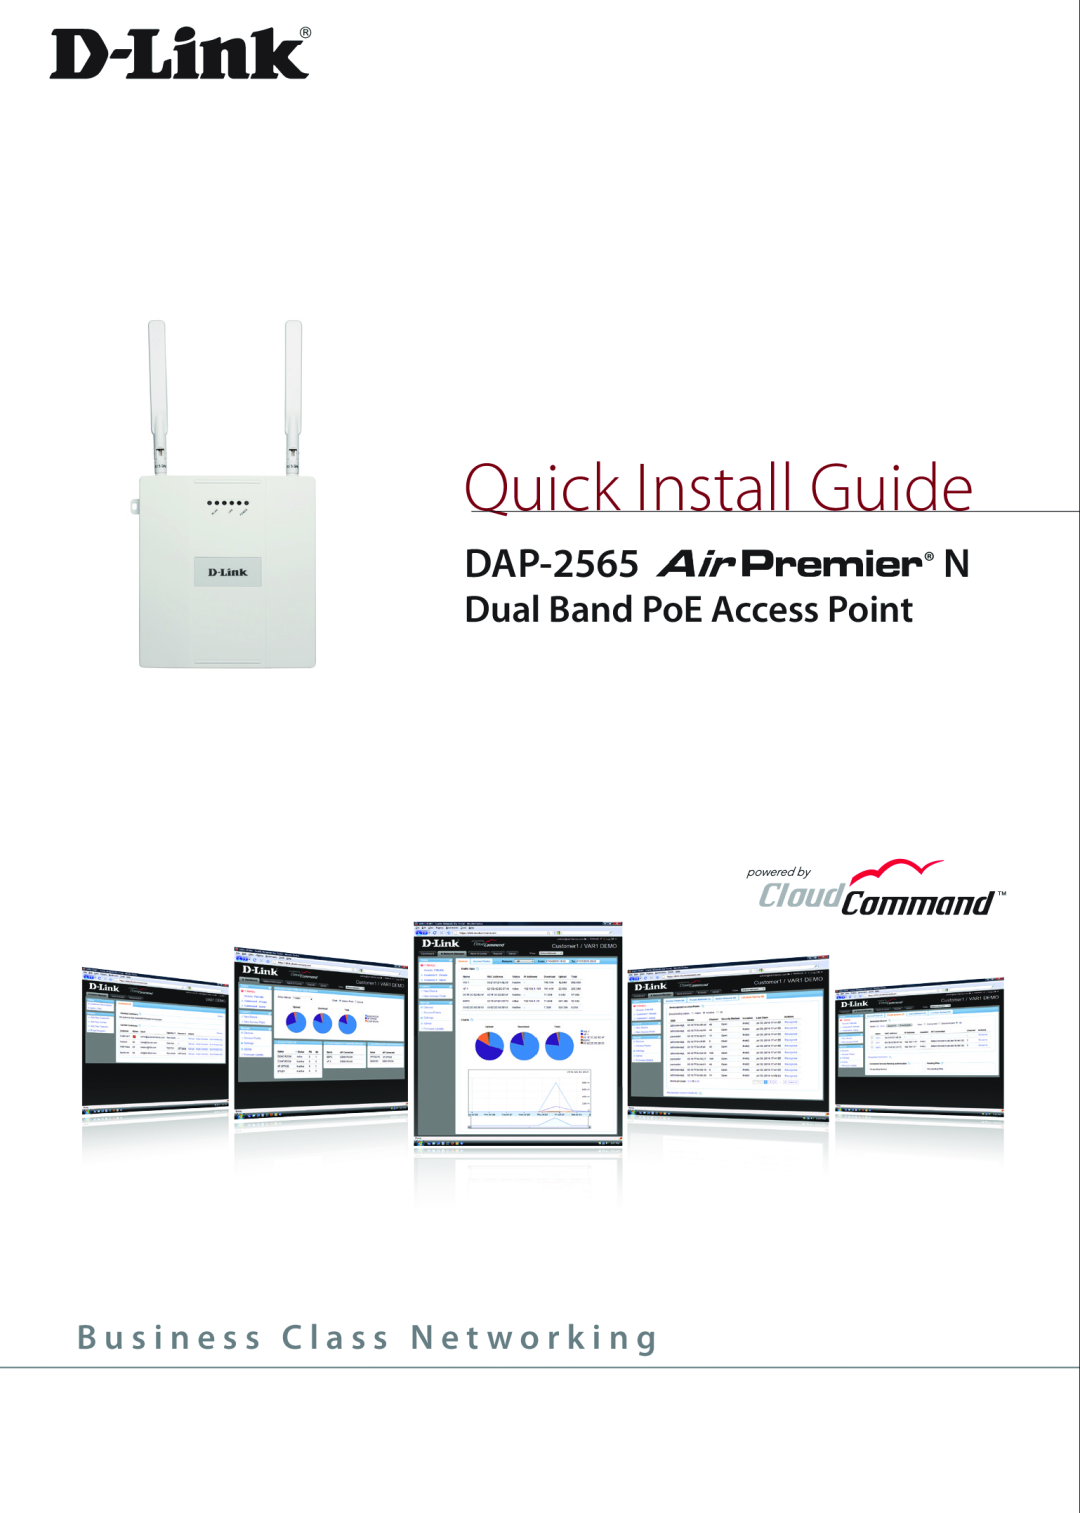 D-Link airpremier n dual band poe access point manual Quick Install Guide, DAP-2565 N, Dual Band PoE Access Point 